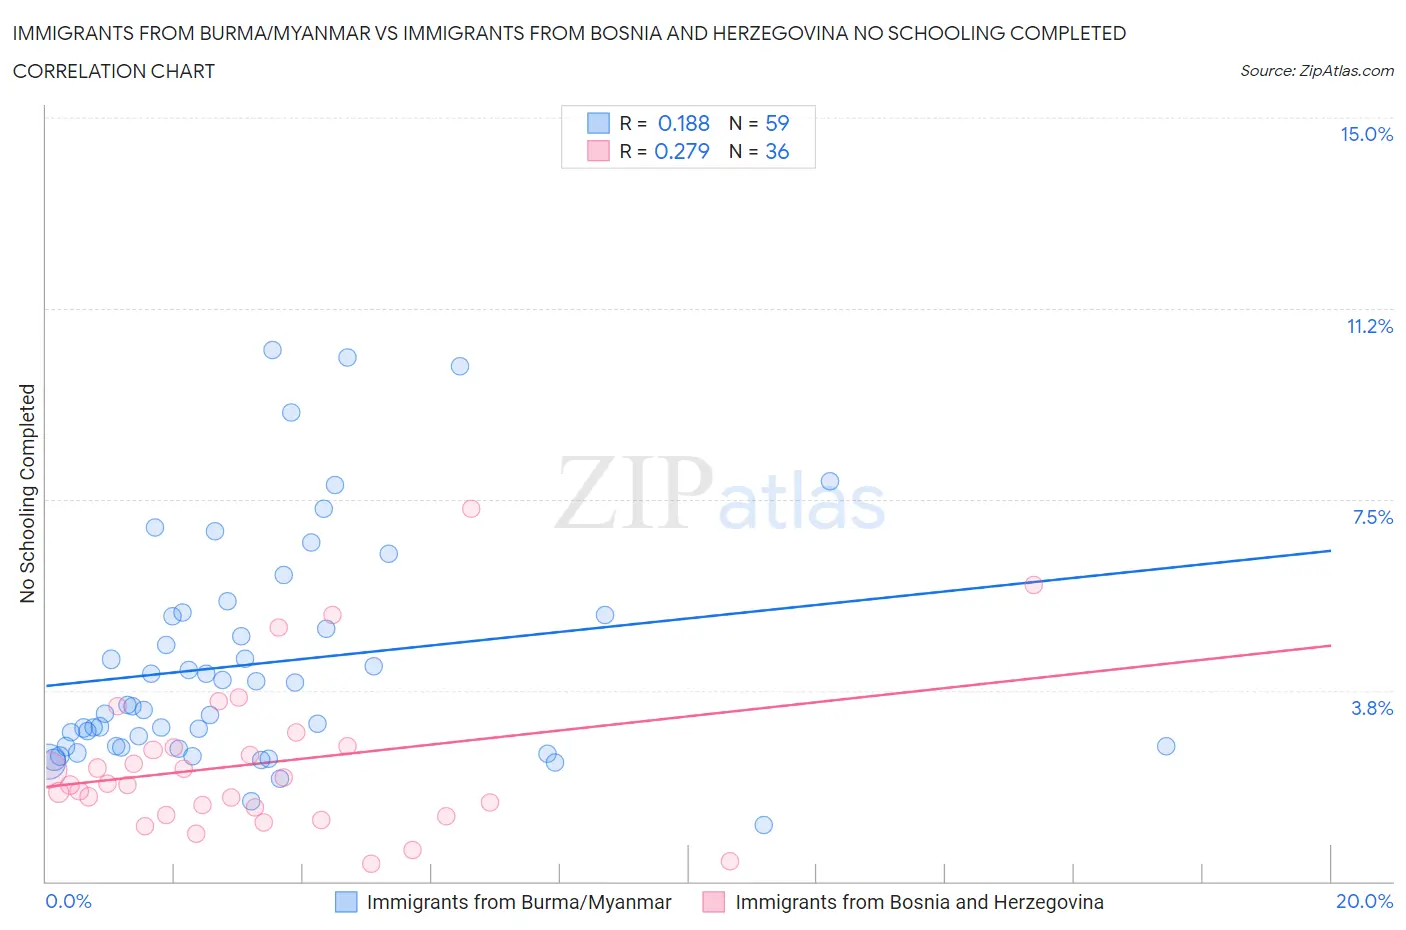 Immigrants from Burma/Myanmar vs Immigrants from Bosnia and Herzegovina No Schooling Completed